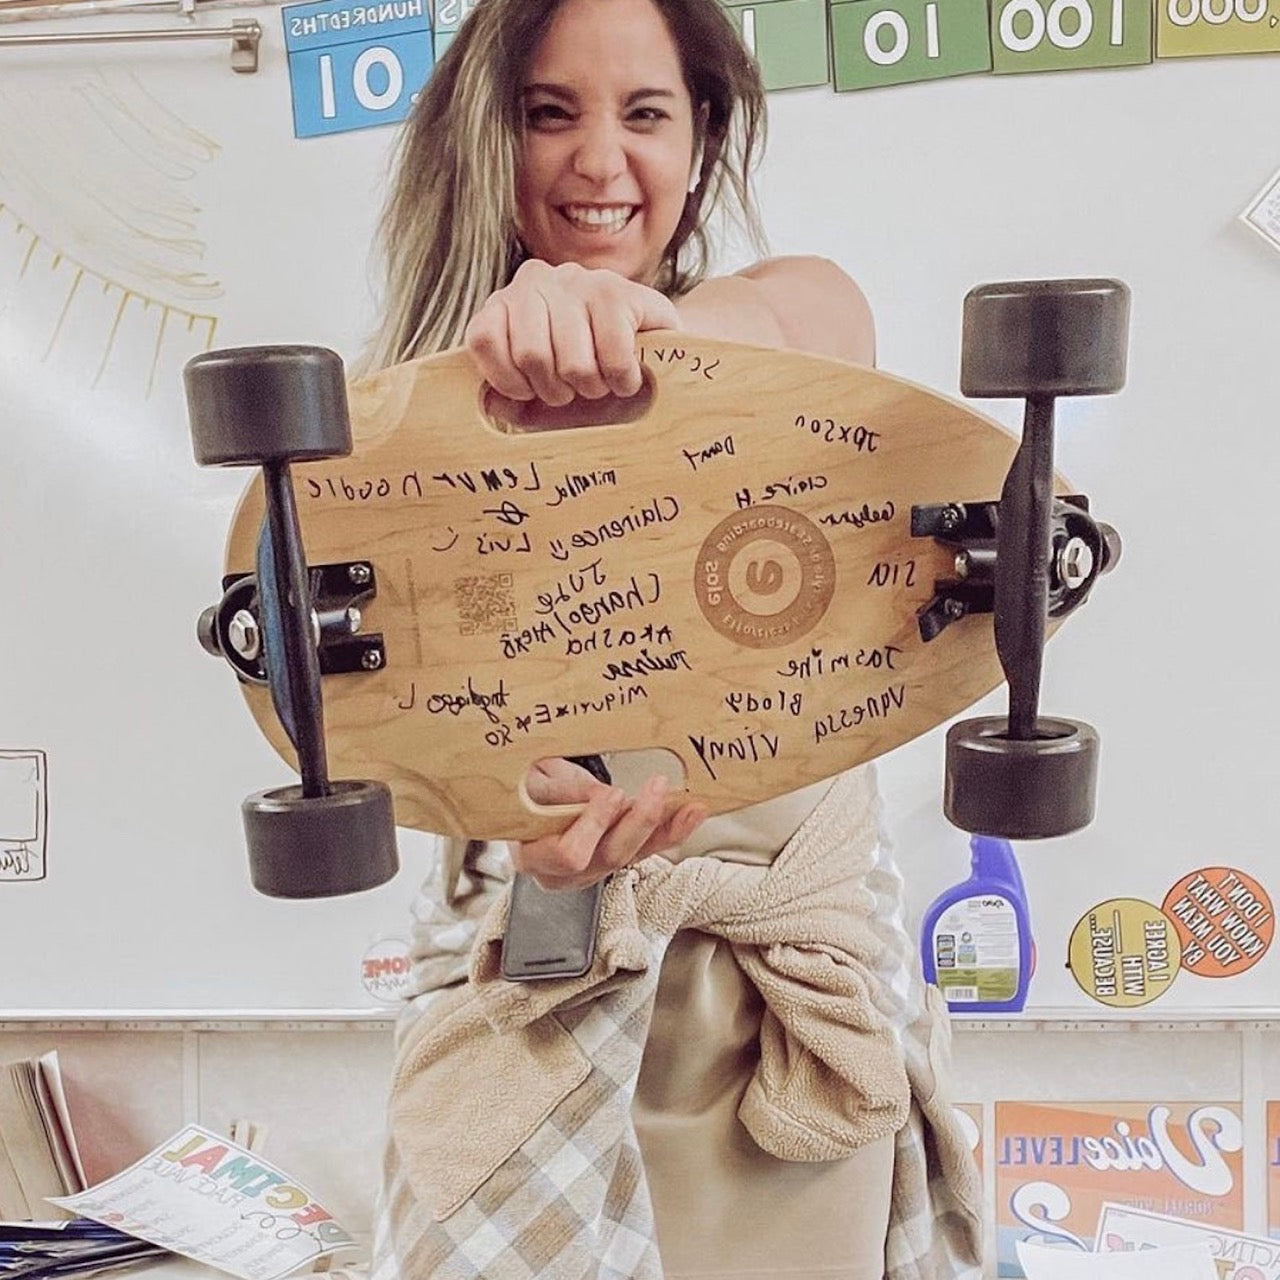 A teacher using Elos DIY kit for steam and educational activity in class, displaying assembled board with student signatures